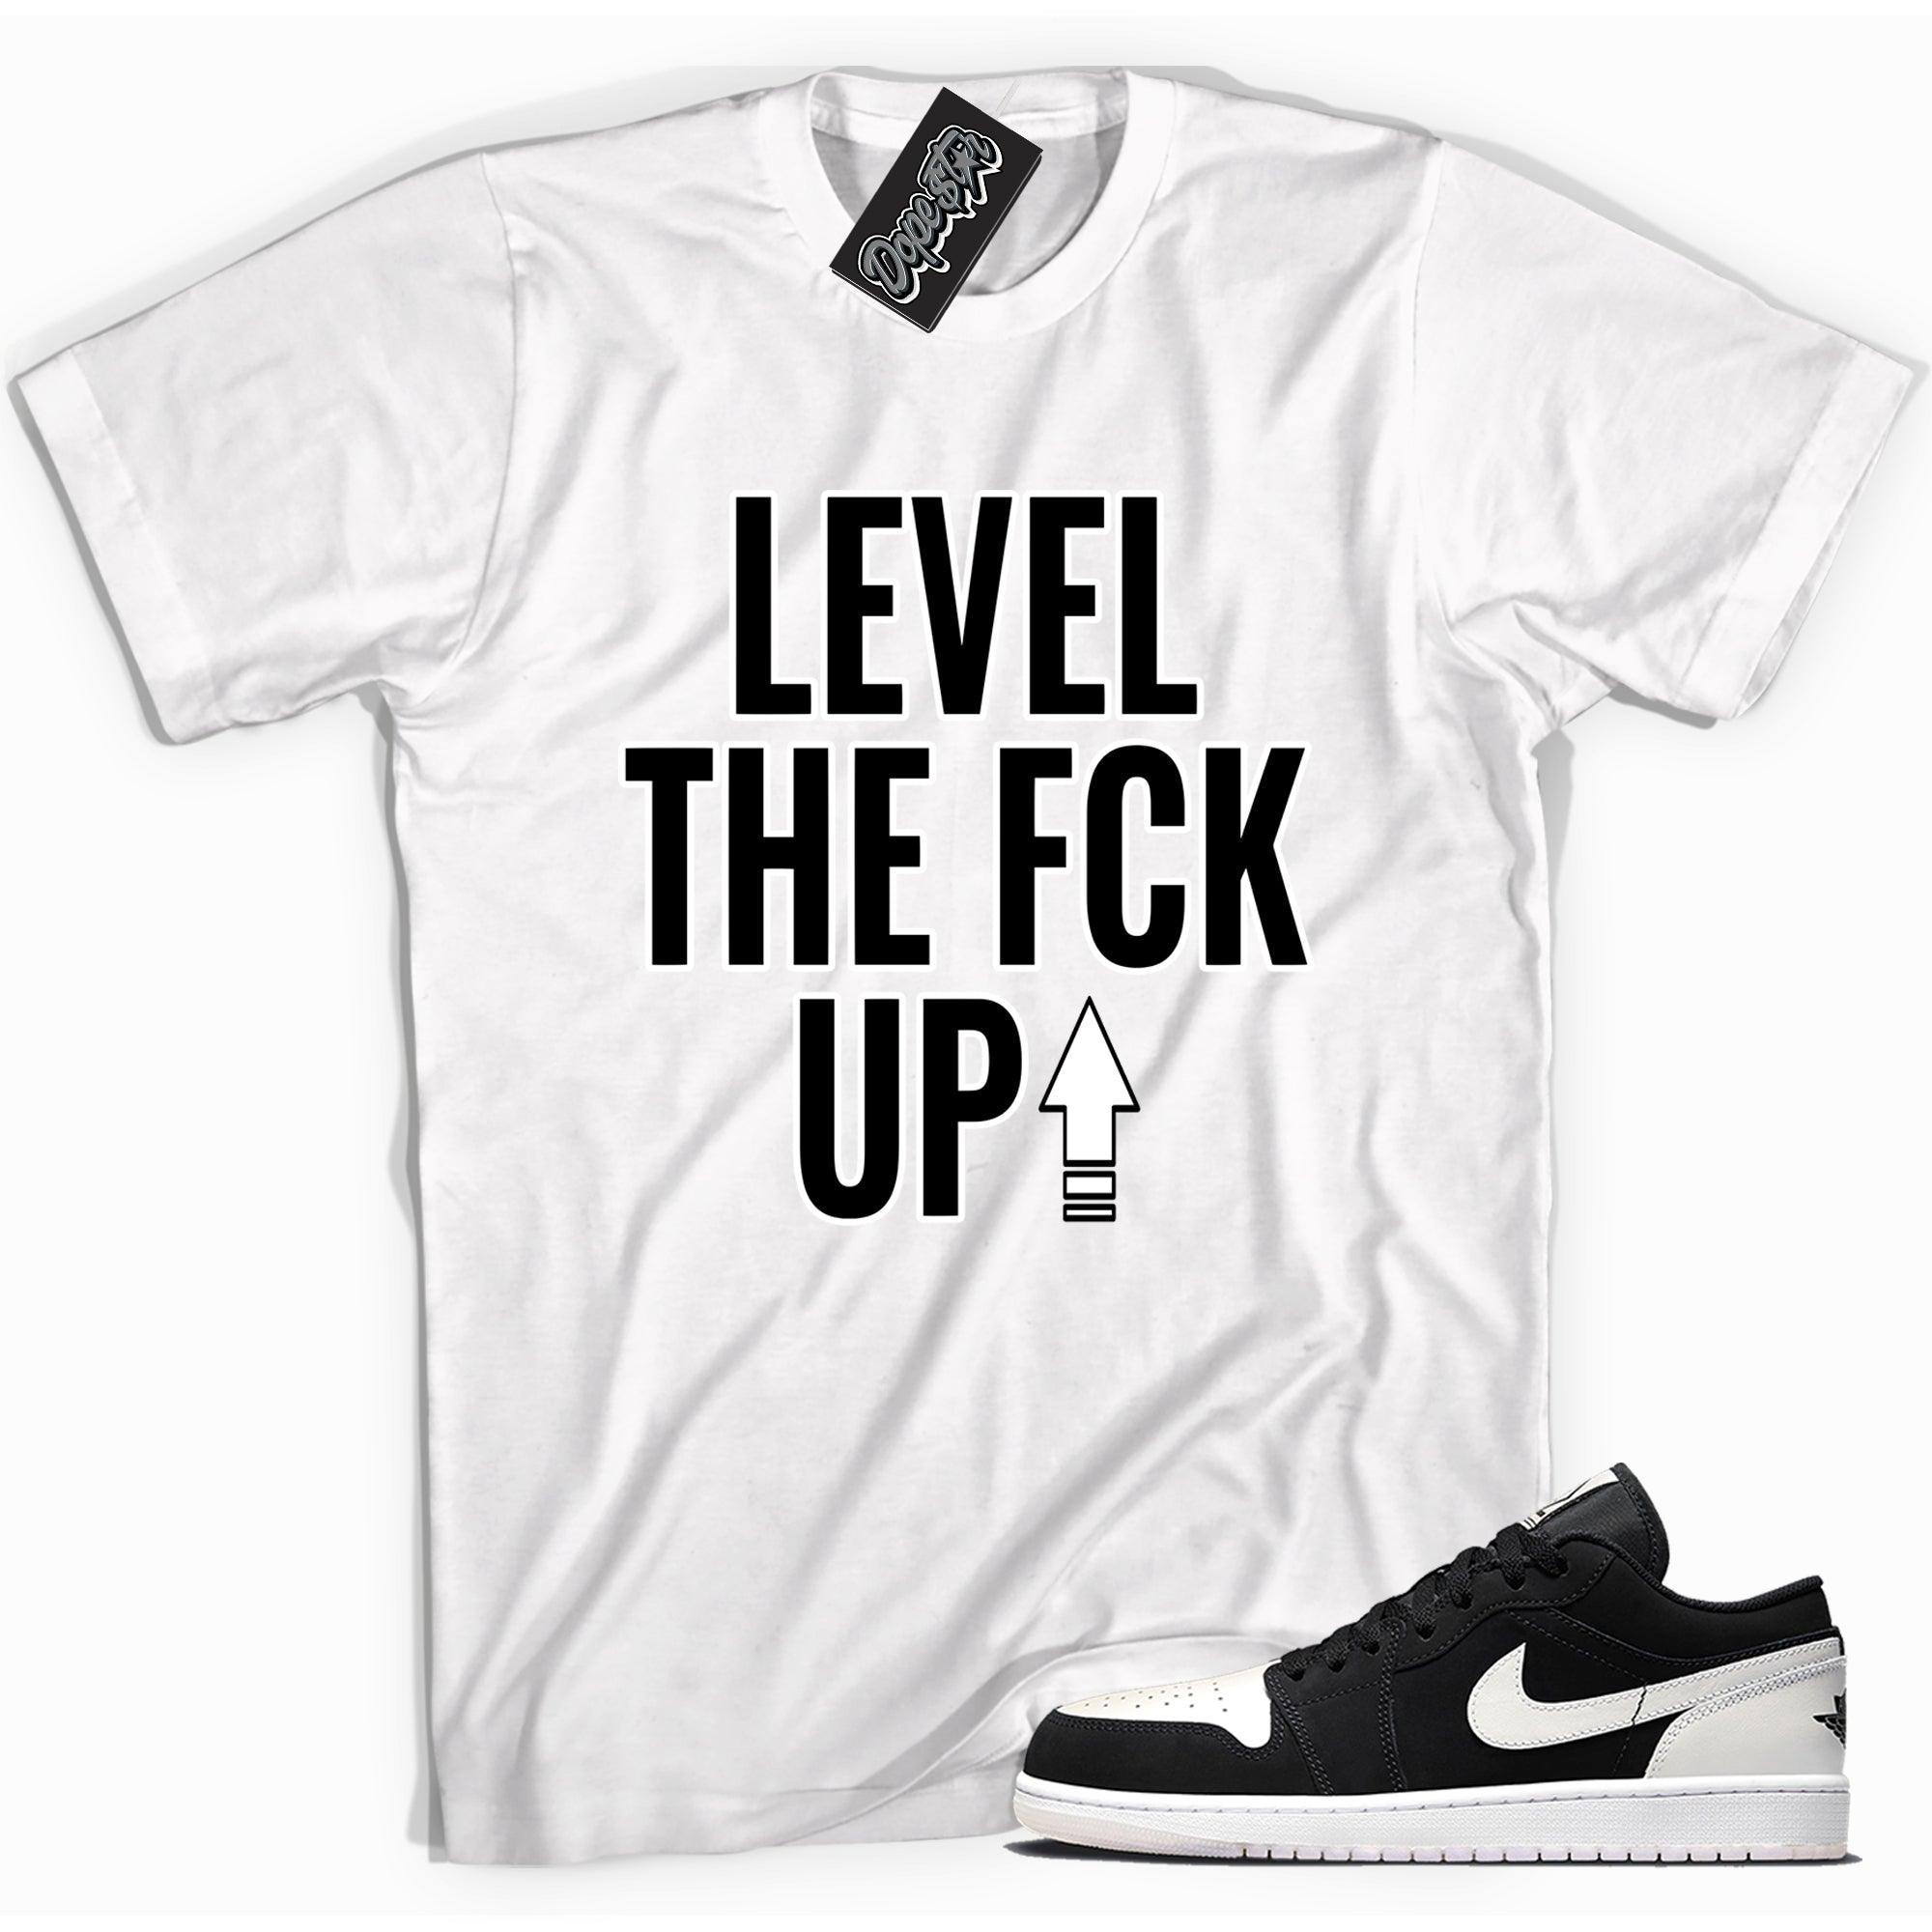 Cool white graphic tee with 'level up' print, that perfectly matches Air Jordan 1 Low Diamond sneakers.